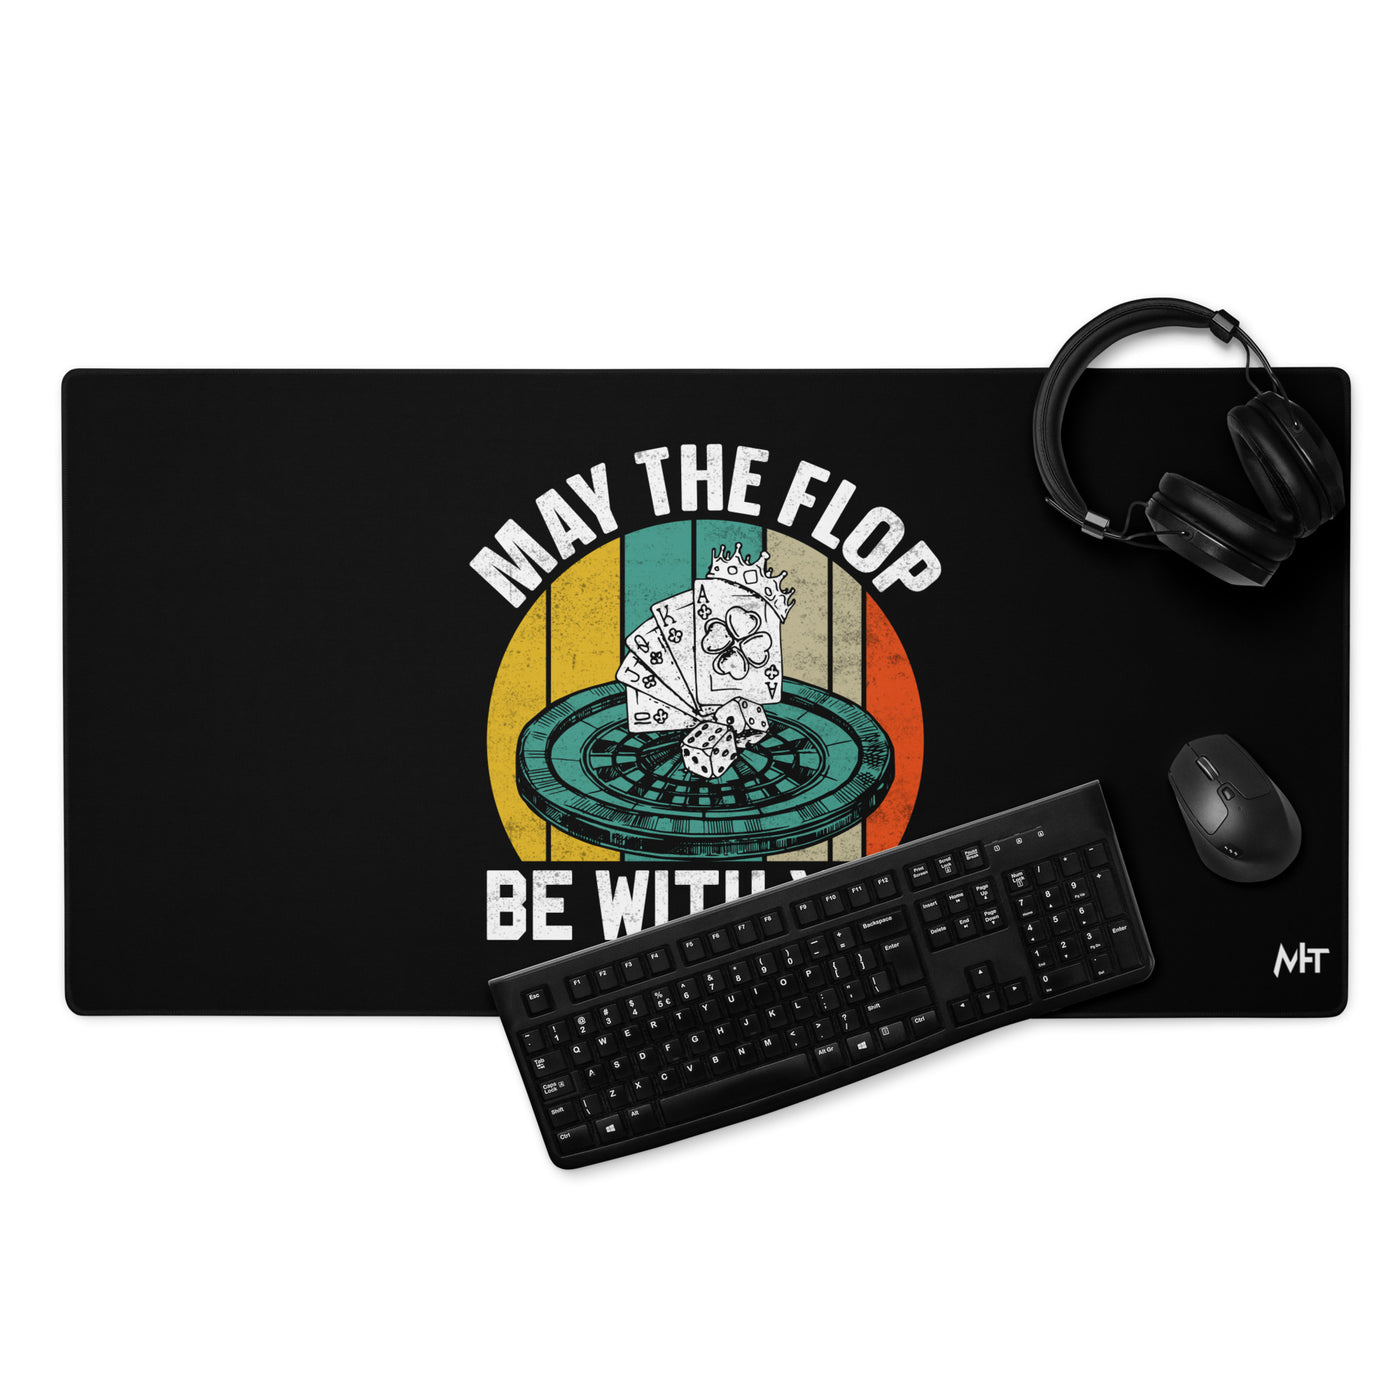 May the Flop be with you - Desk Mat